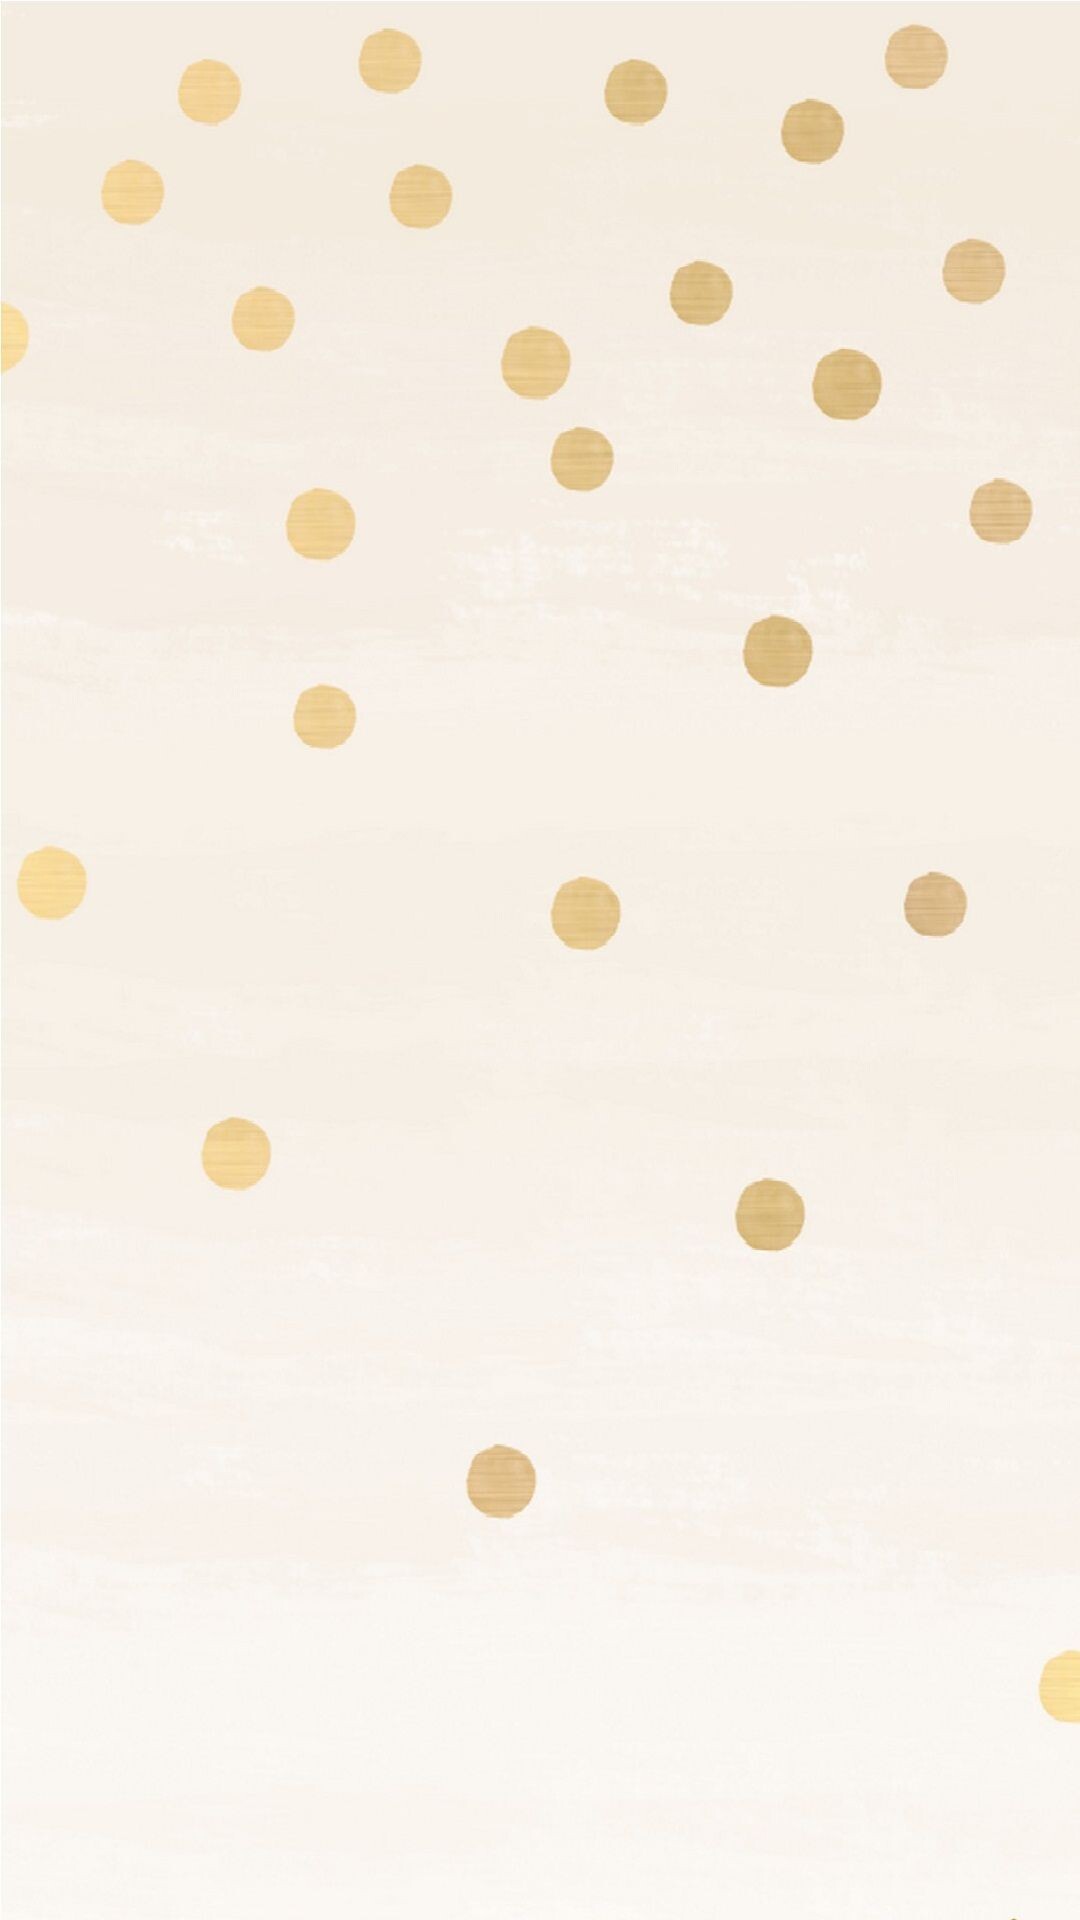 Gold Polka Dot: Sparsely distributed dots, A spatter of decorative and cheerful dots. 1080x1920 Full HD Background.